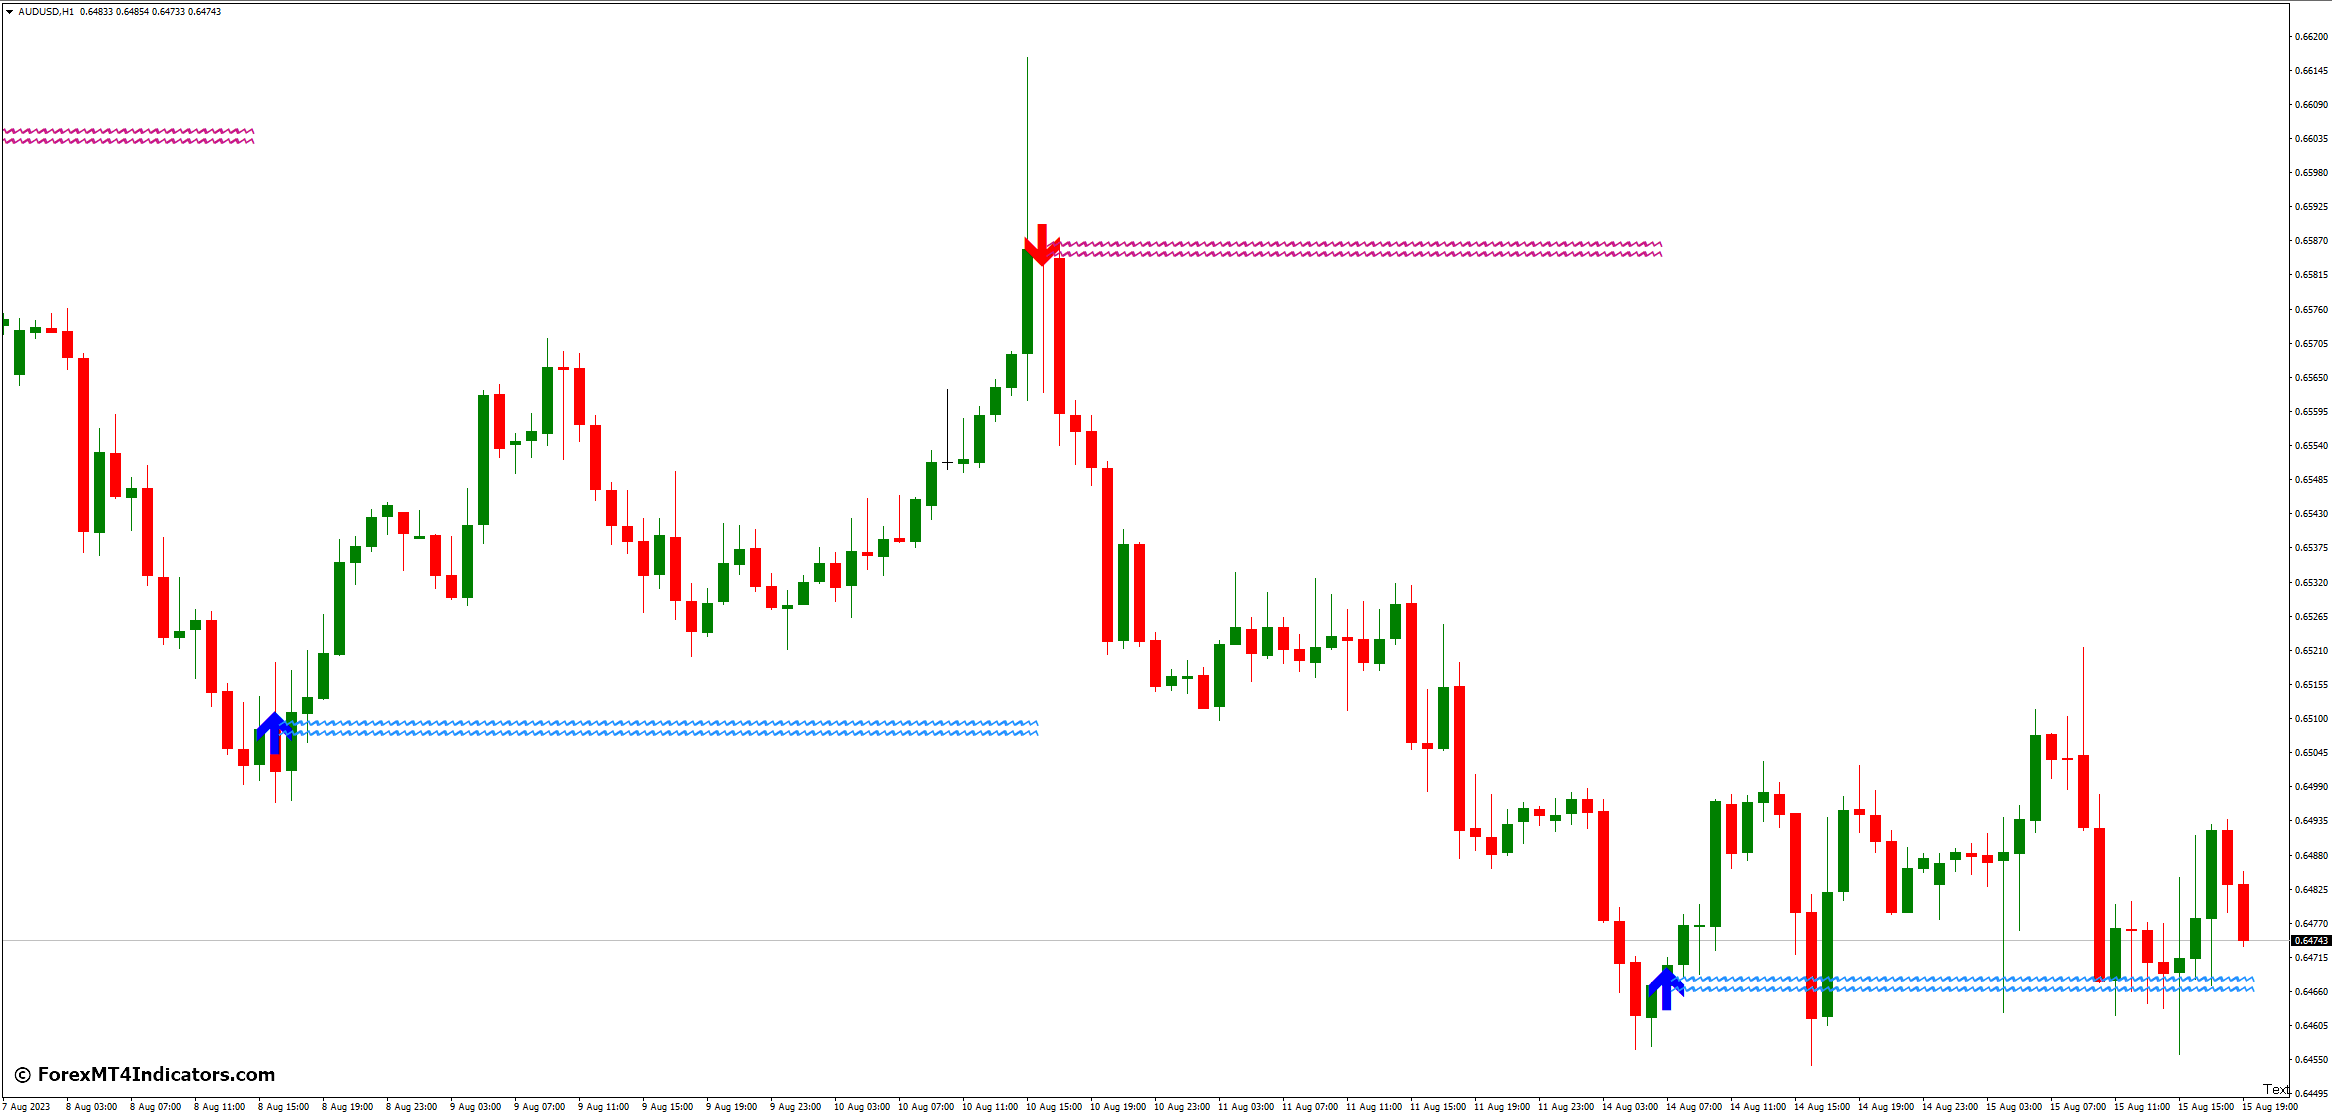 Advantages of Using the Lucky Reversal Indicator